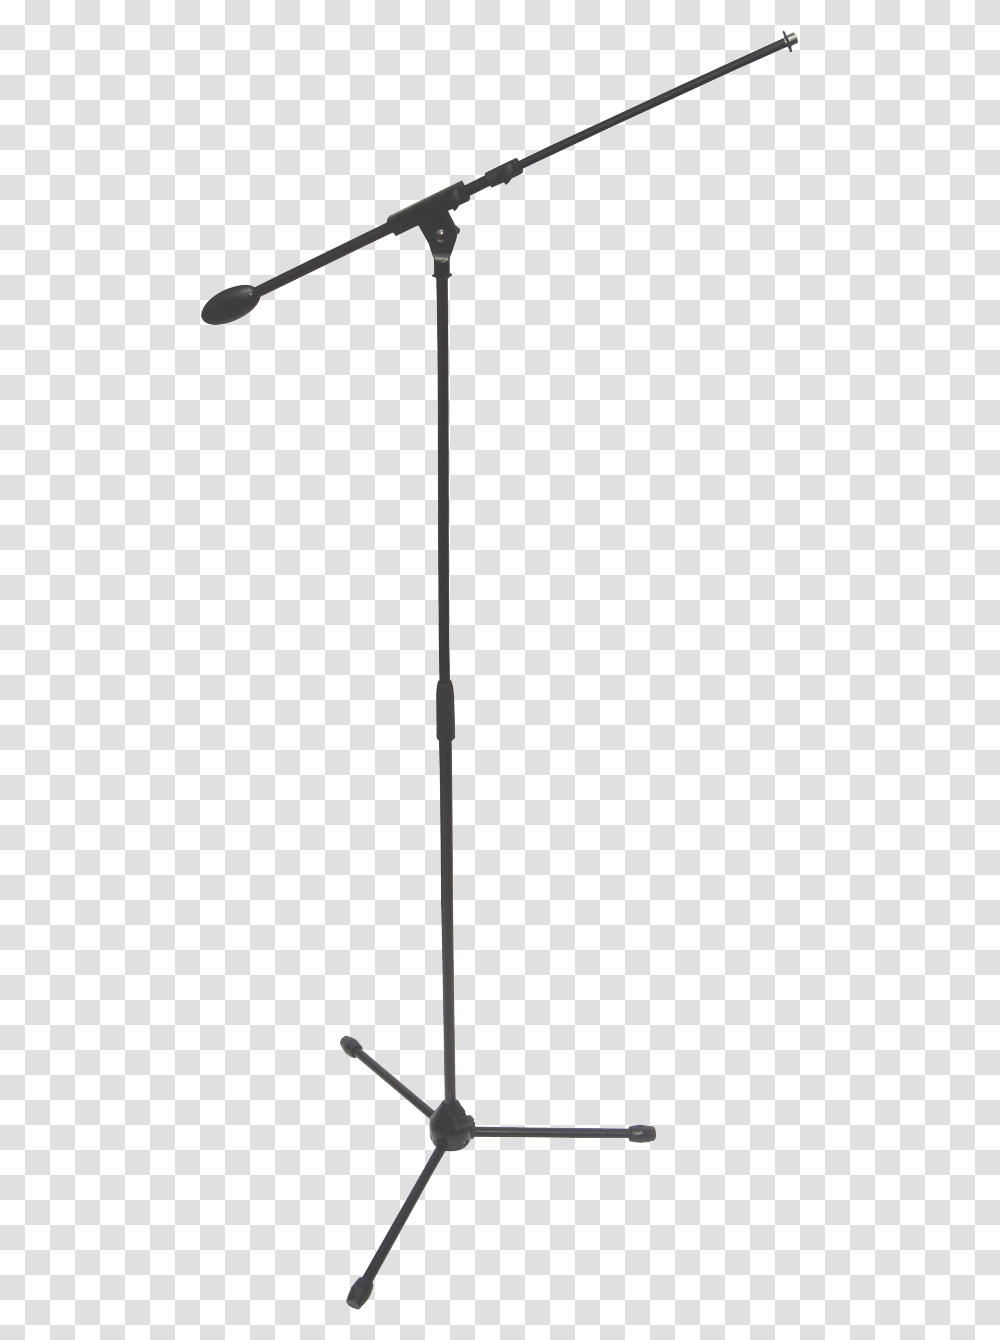 Mic Stand Clipart Boom Mic Stand Icon, Stick, Cane, Utility Pole, Baton Transparent Png